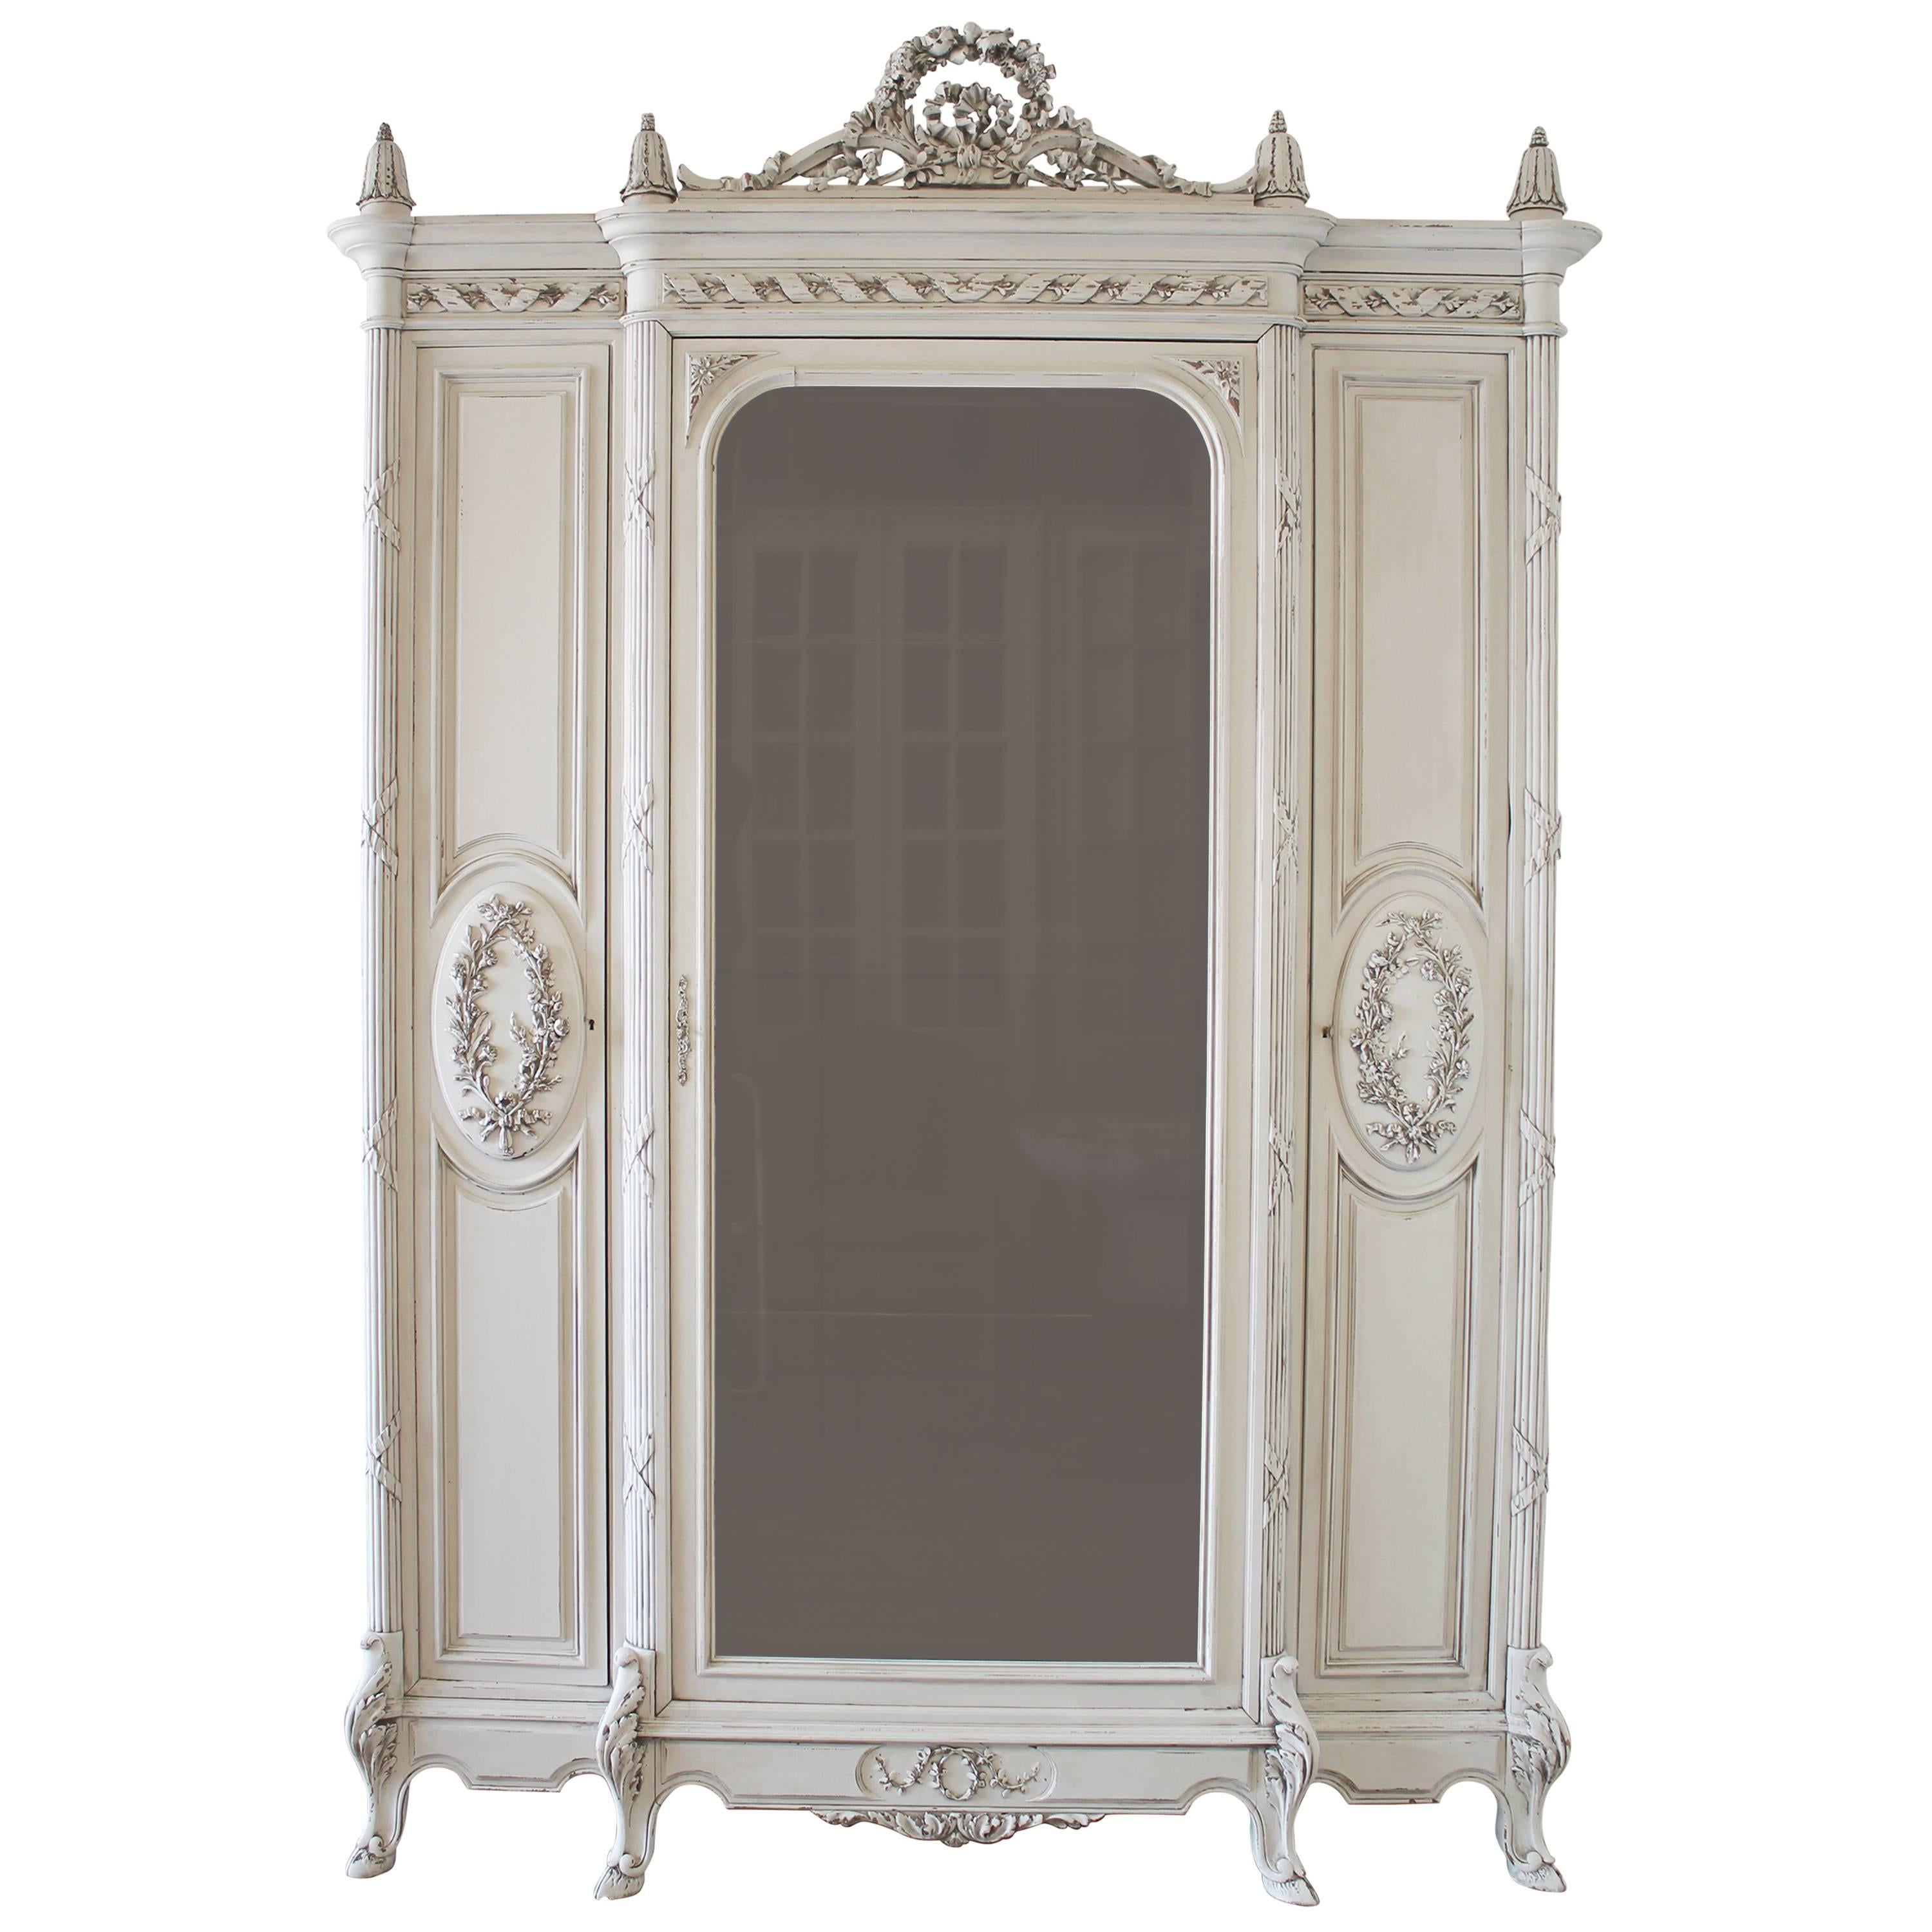 19th Century Painted Antique French Louis XV Style Armoire Display Cabinet